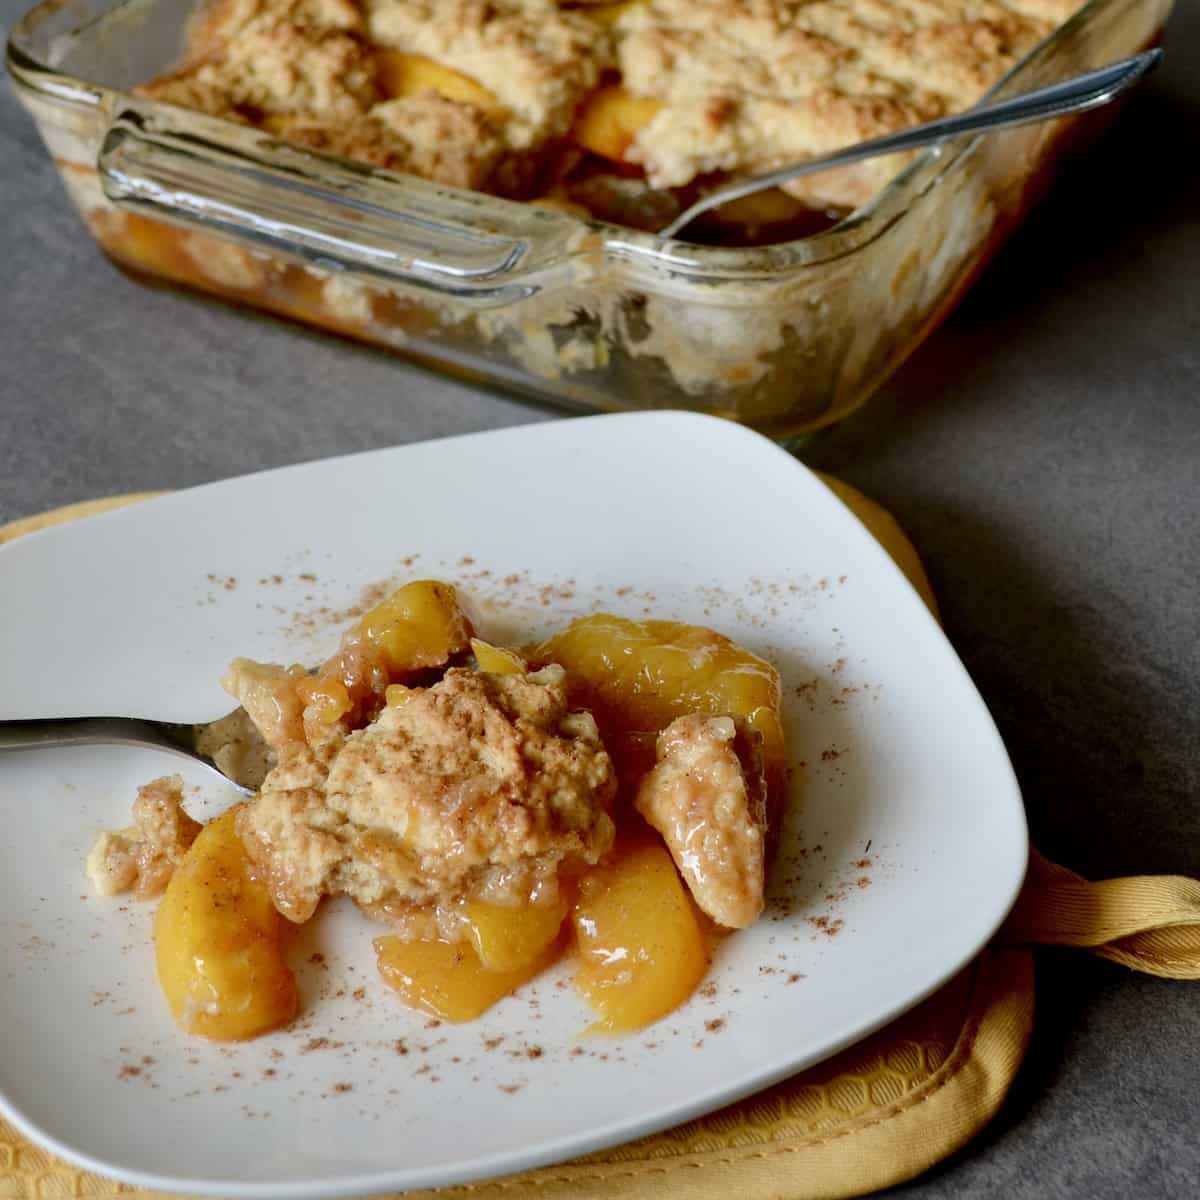 Plated peach cobbler with cinnamon